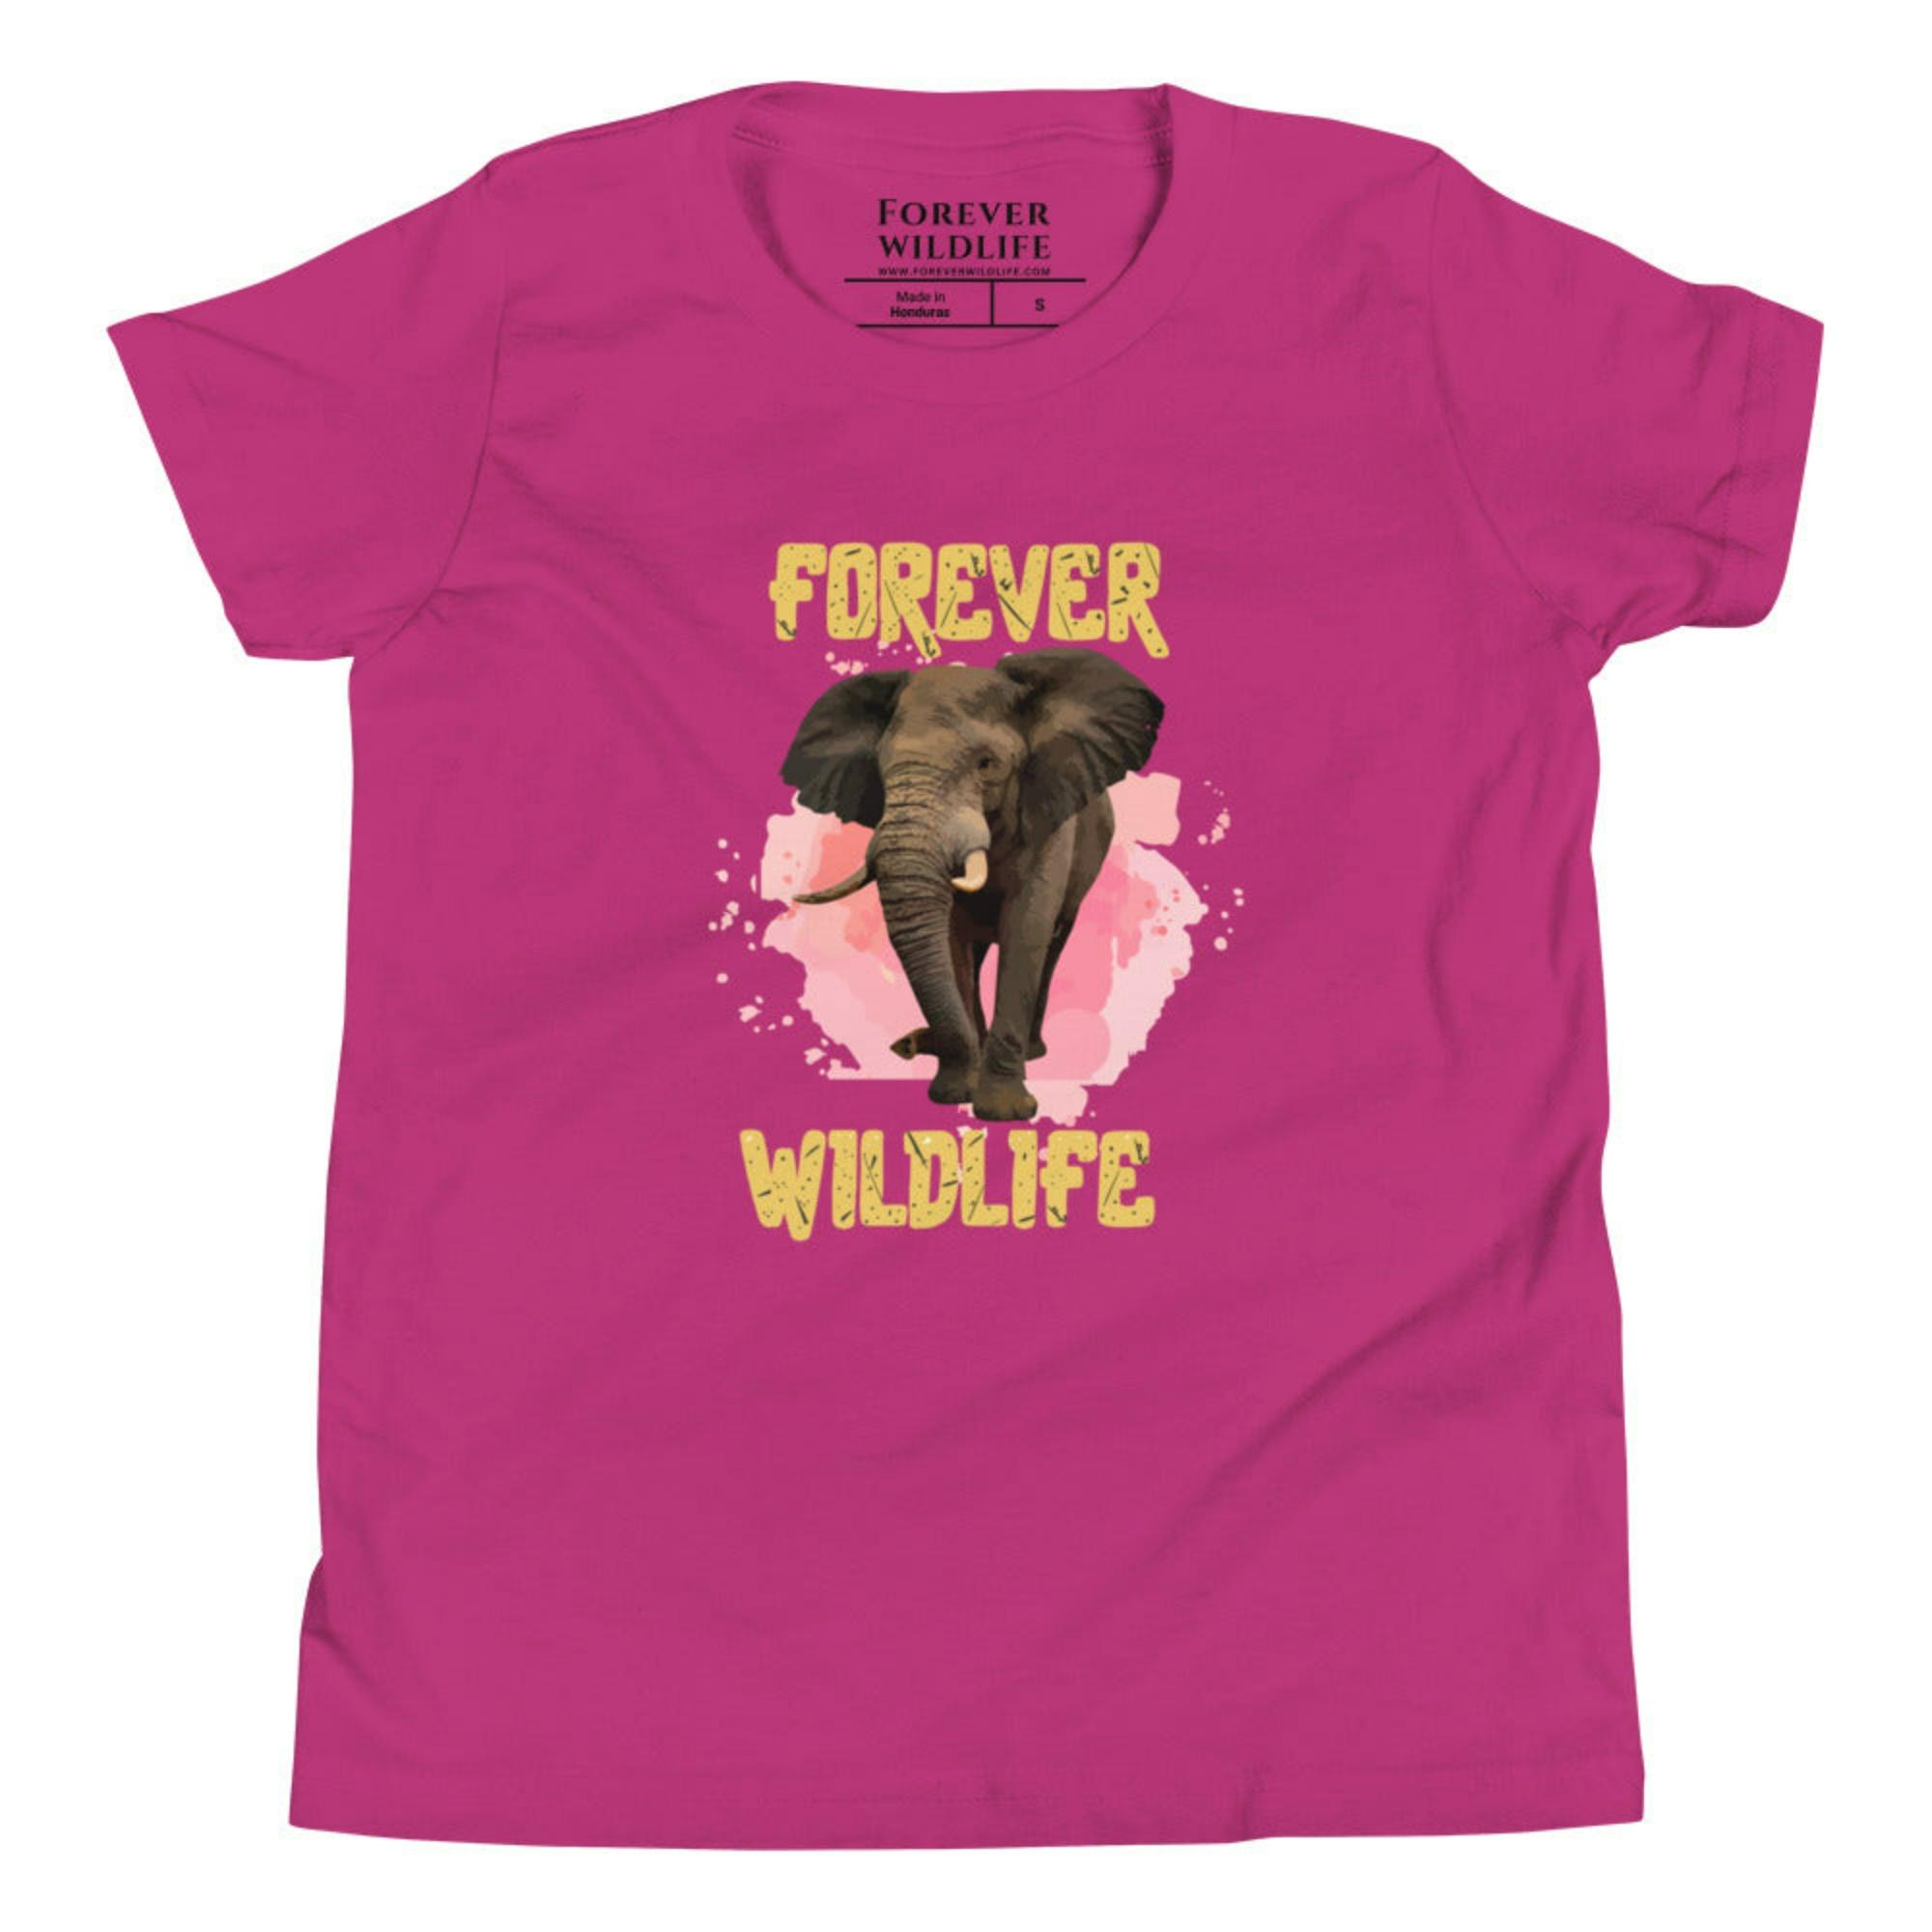 Berry Youth T-Shirt with Elephant graphic as part of Wildlife T Shirts, Wildlife Clothing & Apparel by Forever Wildlife